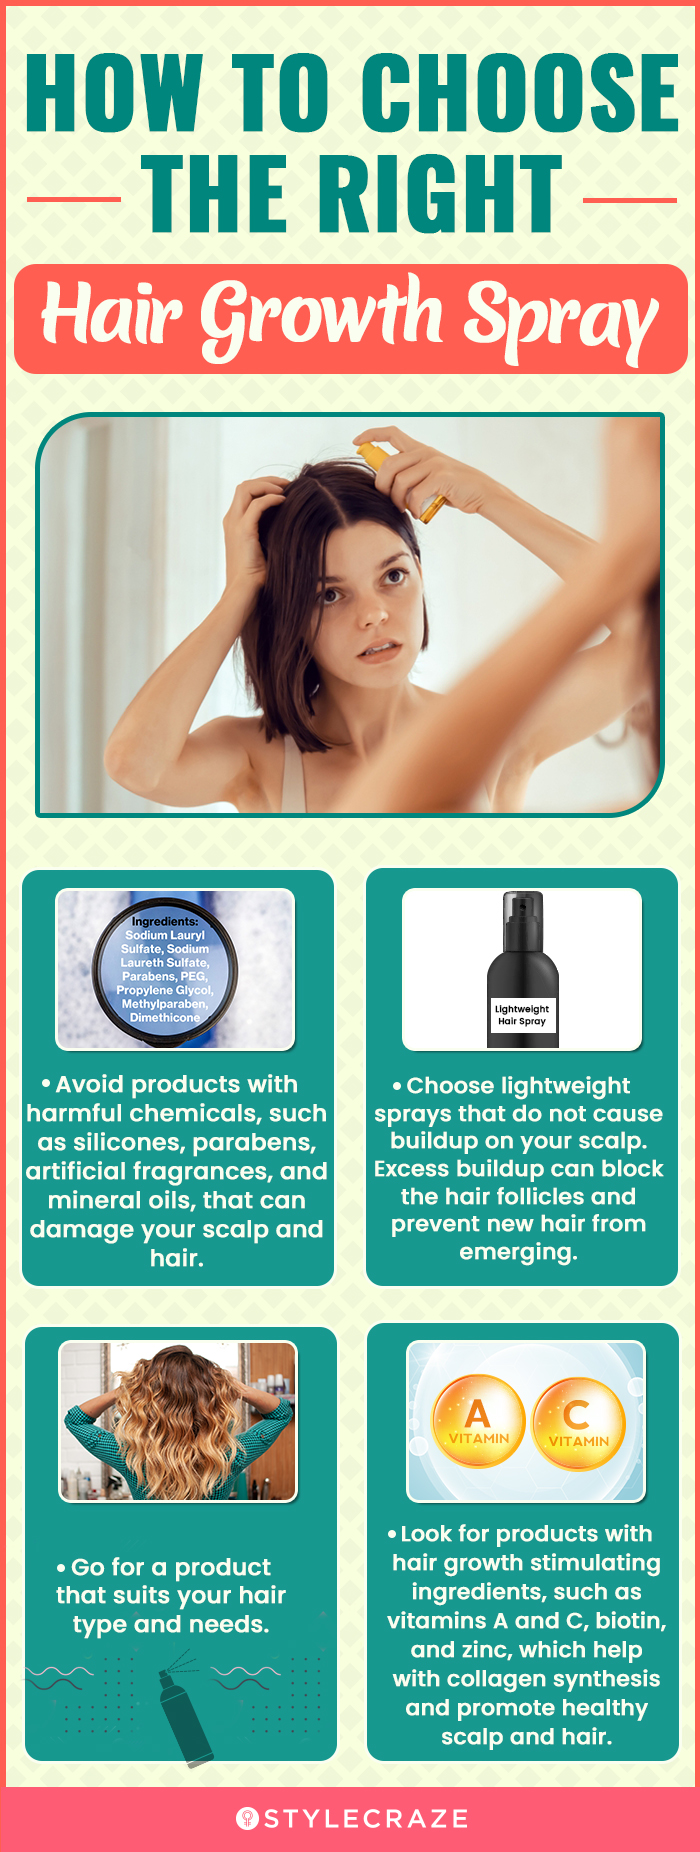 How To Choose The Right Hair Growth Spray